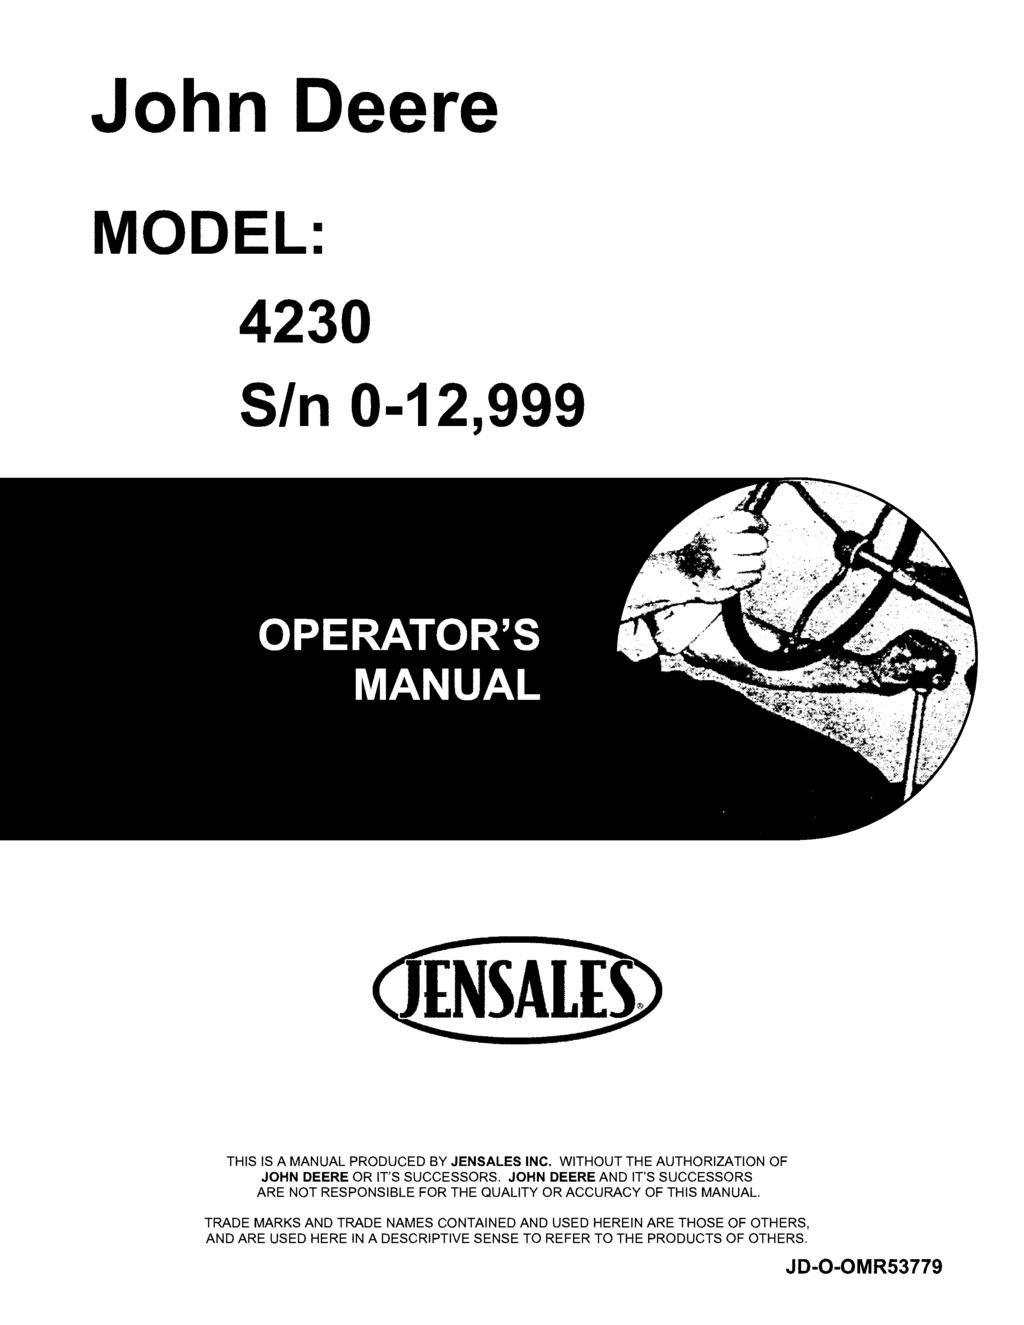 John Deere MODEL: 4230 SIn 0-12,999 THIS IS A MANUAL PRODUCED BY JENSALES INC. WITHOUT THE AUTHORIZATION OF JOHN DEERE OR IT'S SUCCESSORS.